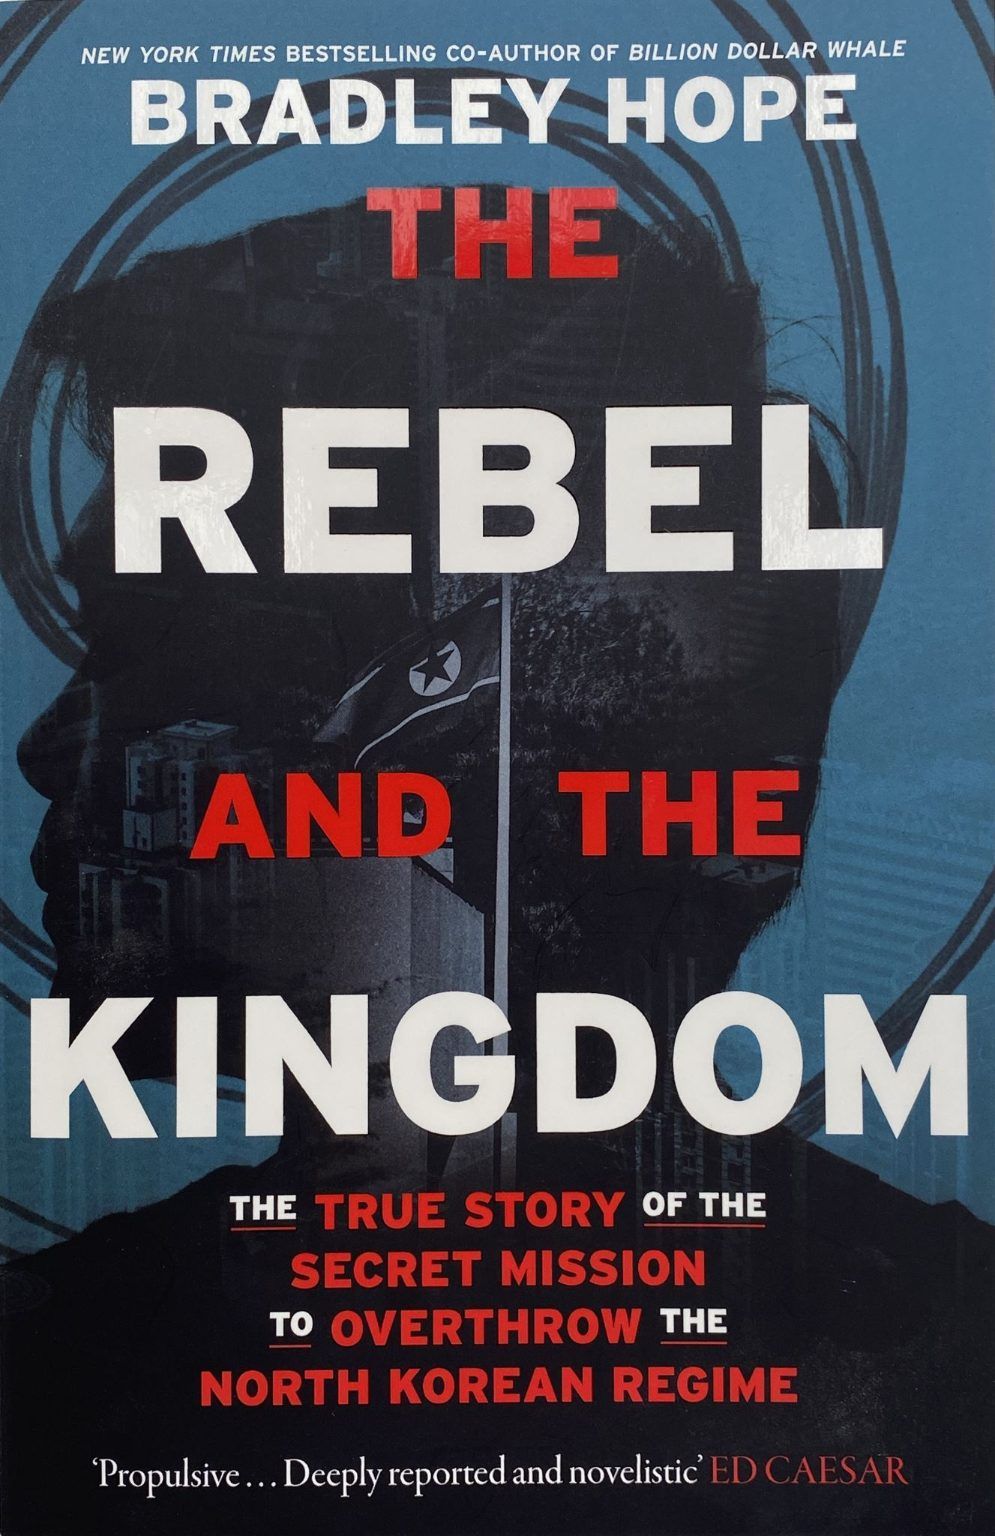 THE REBEL AND THE KINGDOM